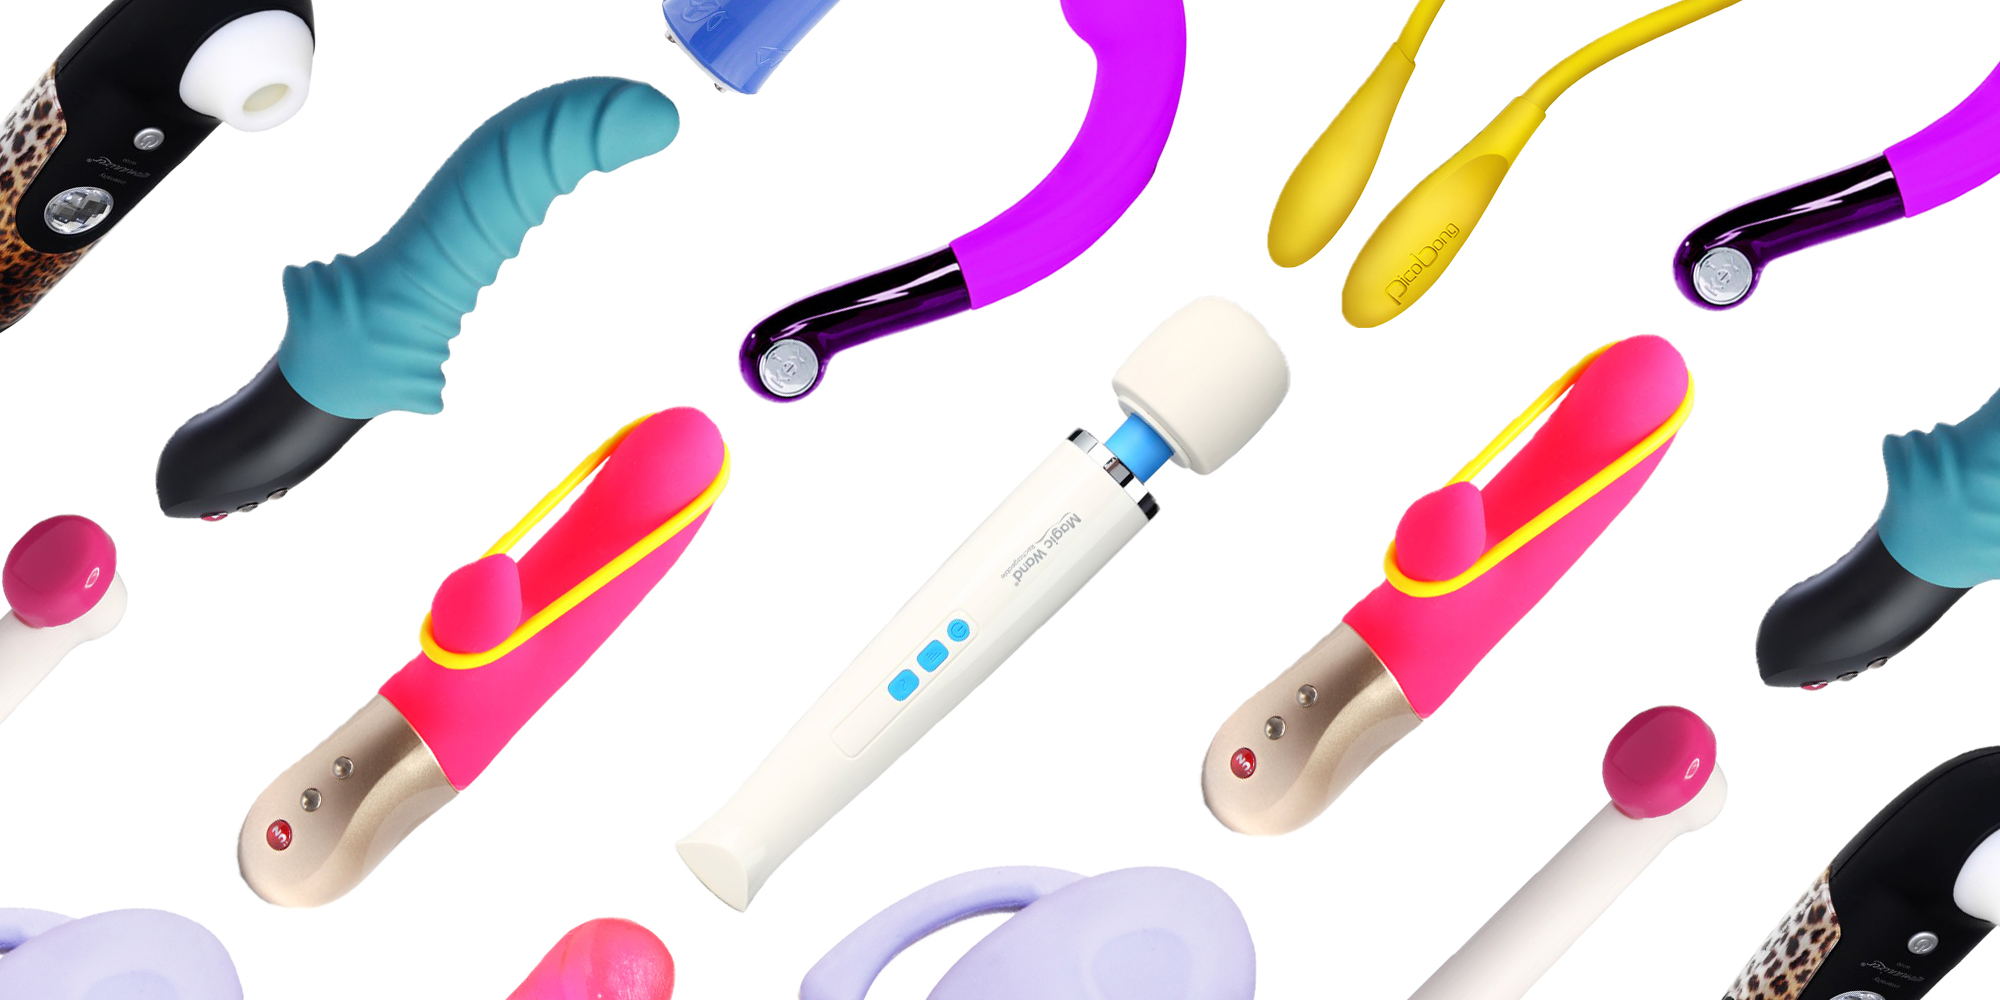 An Ultimate Guide To The Best Sex Toys, According To Zealous Reviewers